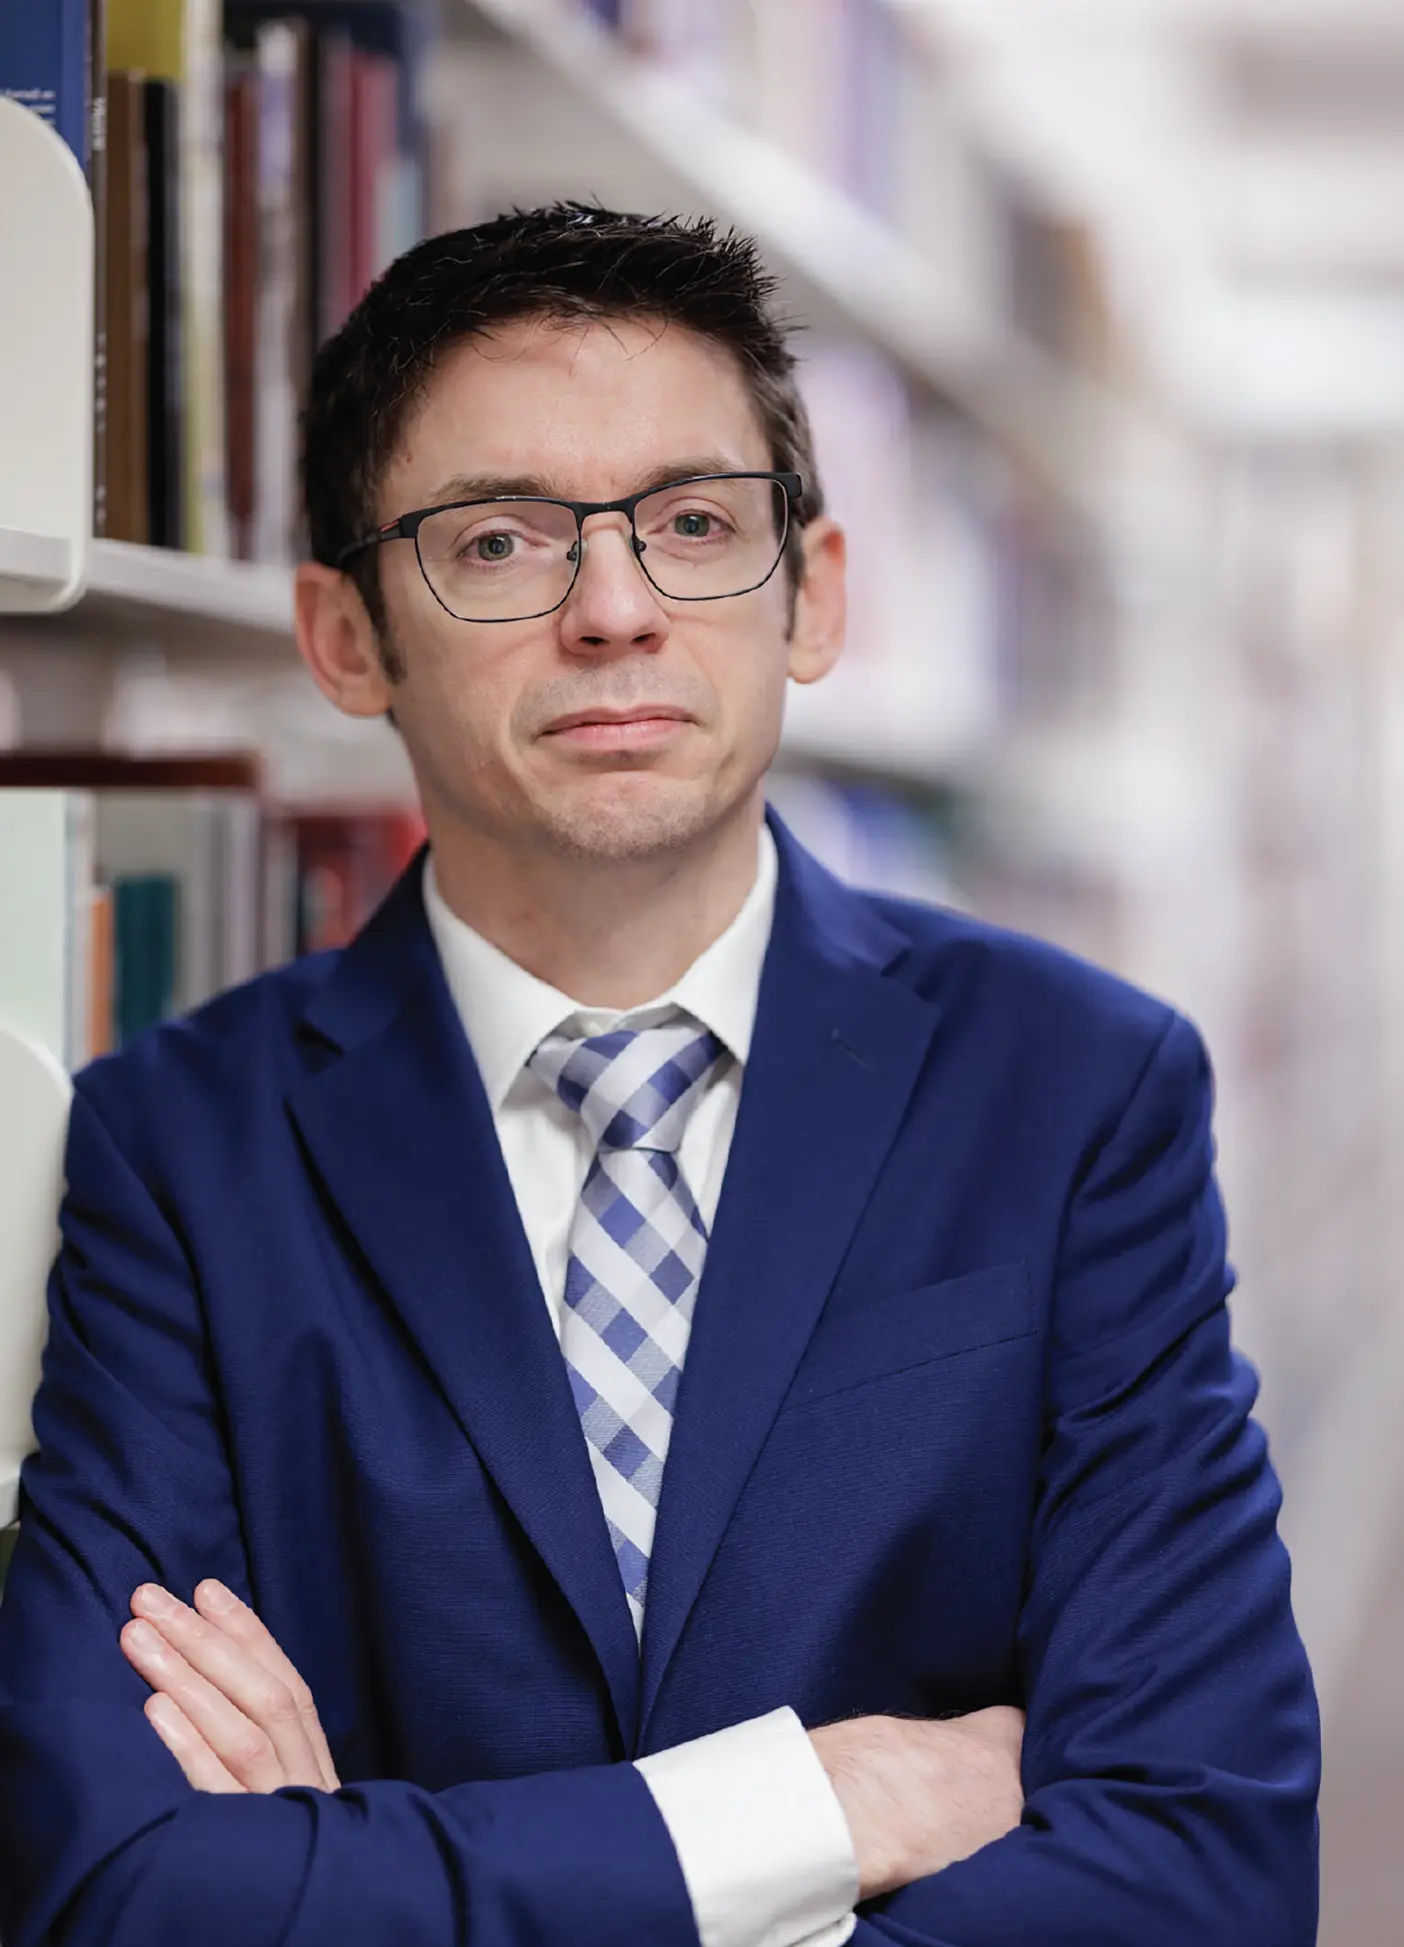 A man with glasses in front of a long book shelf looks at the camera.